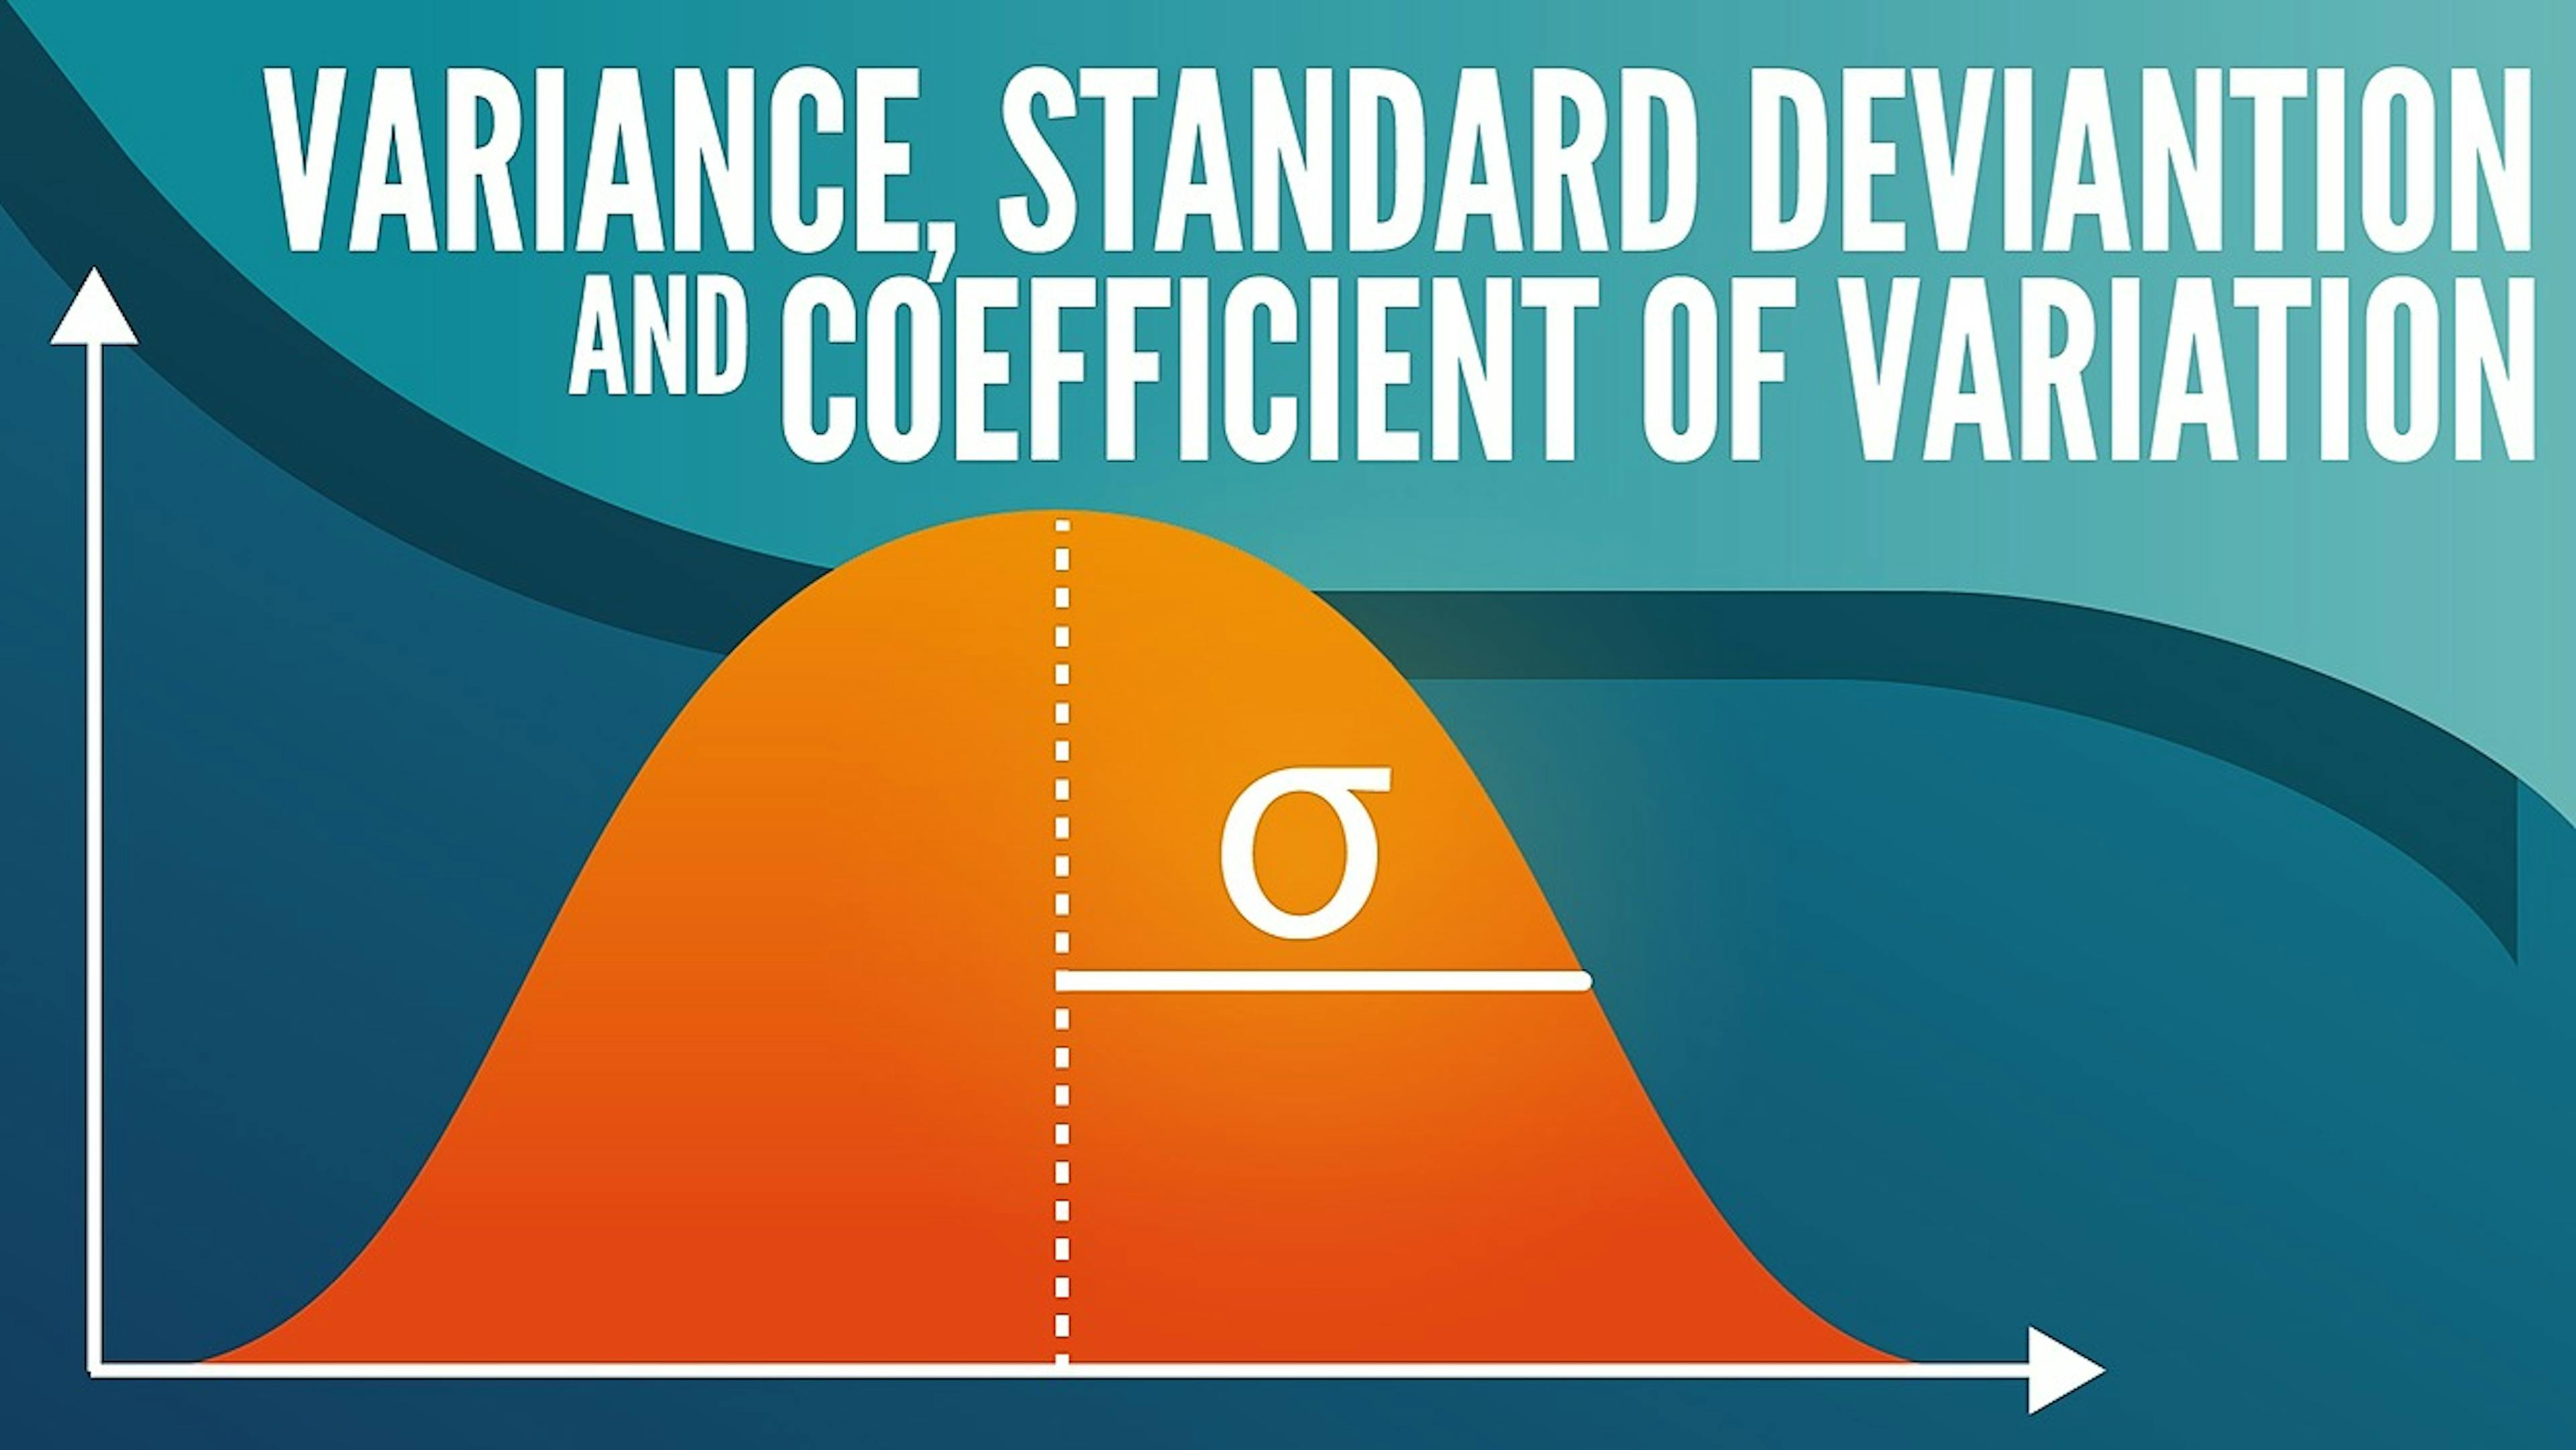 featured image - Quantifying Variability: Variance, Standard Deviation, and Coefficient of Variation